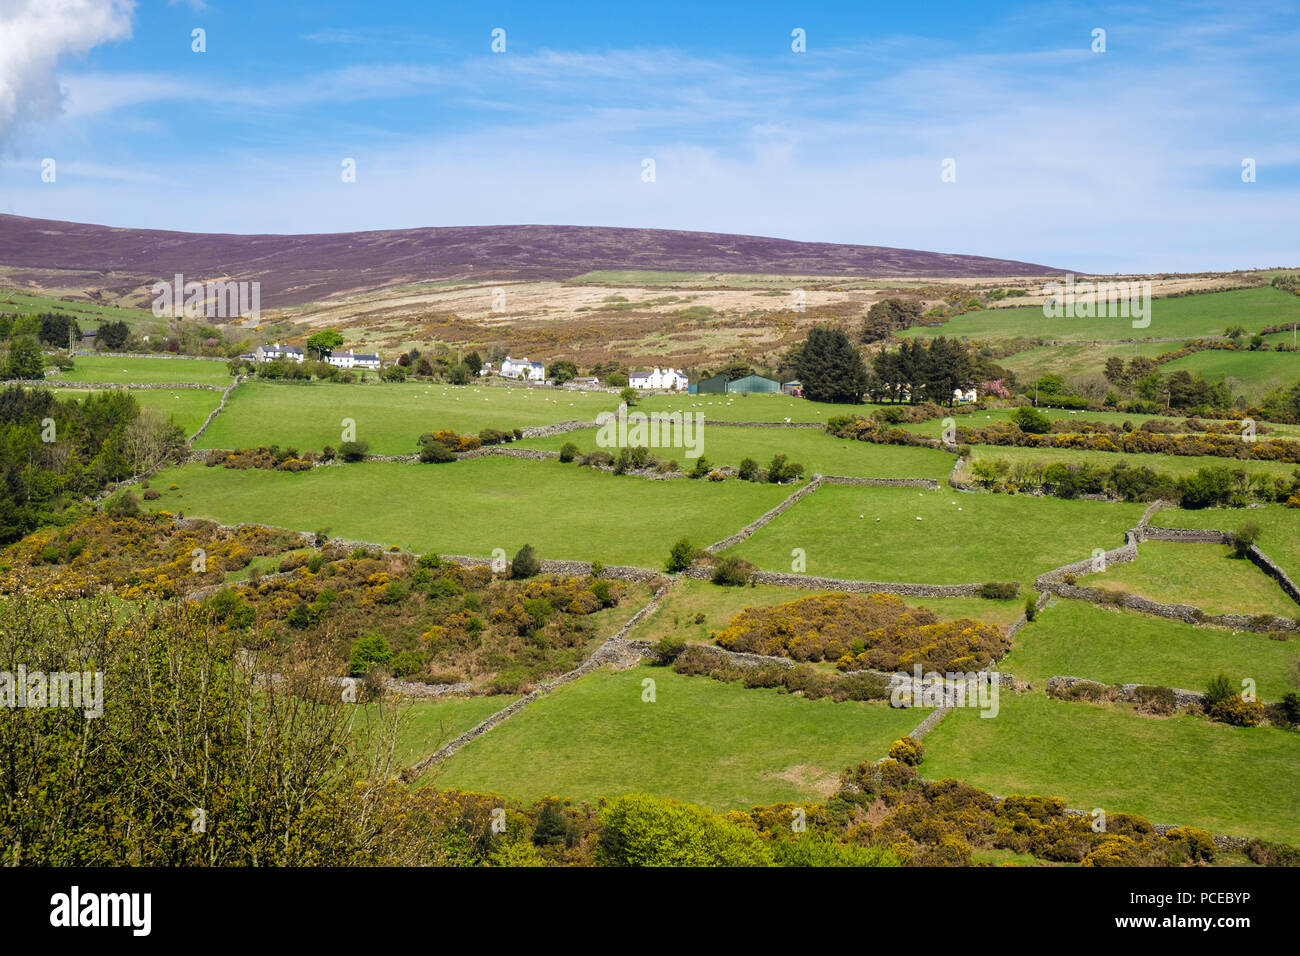 Countryside with stone walls around fields on hills around. Laxey, Isle of Man, British Isles Stock Photo